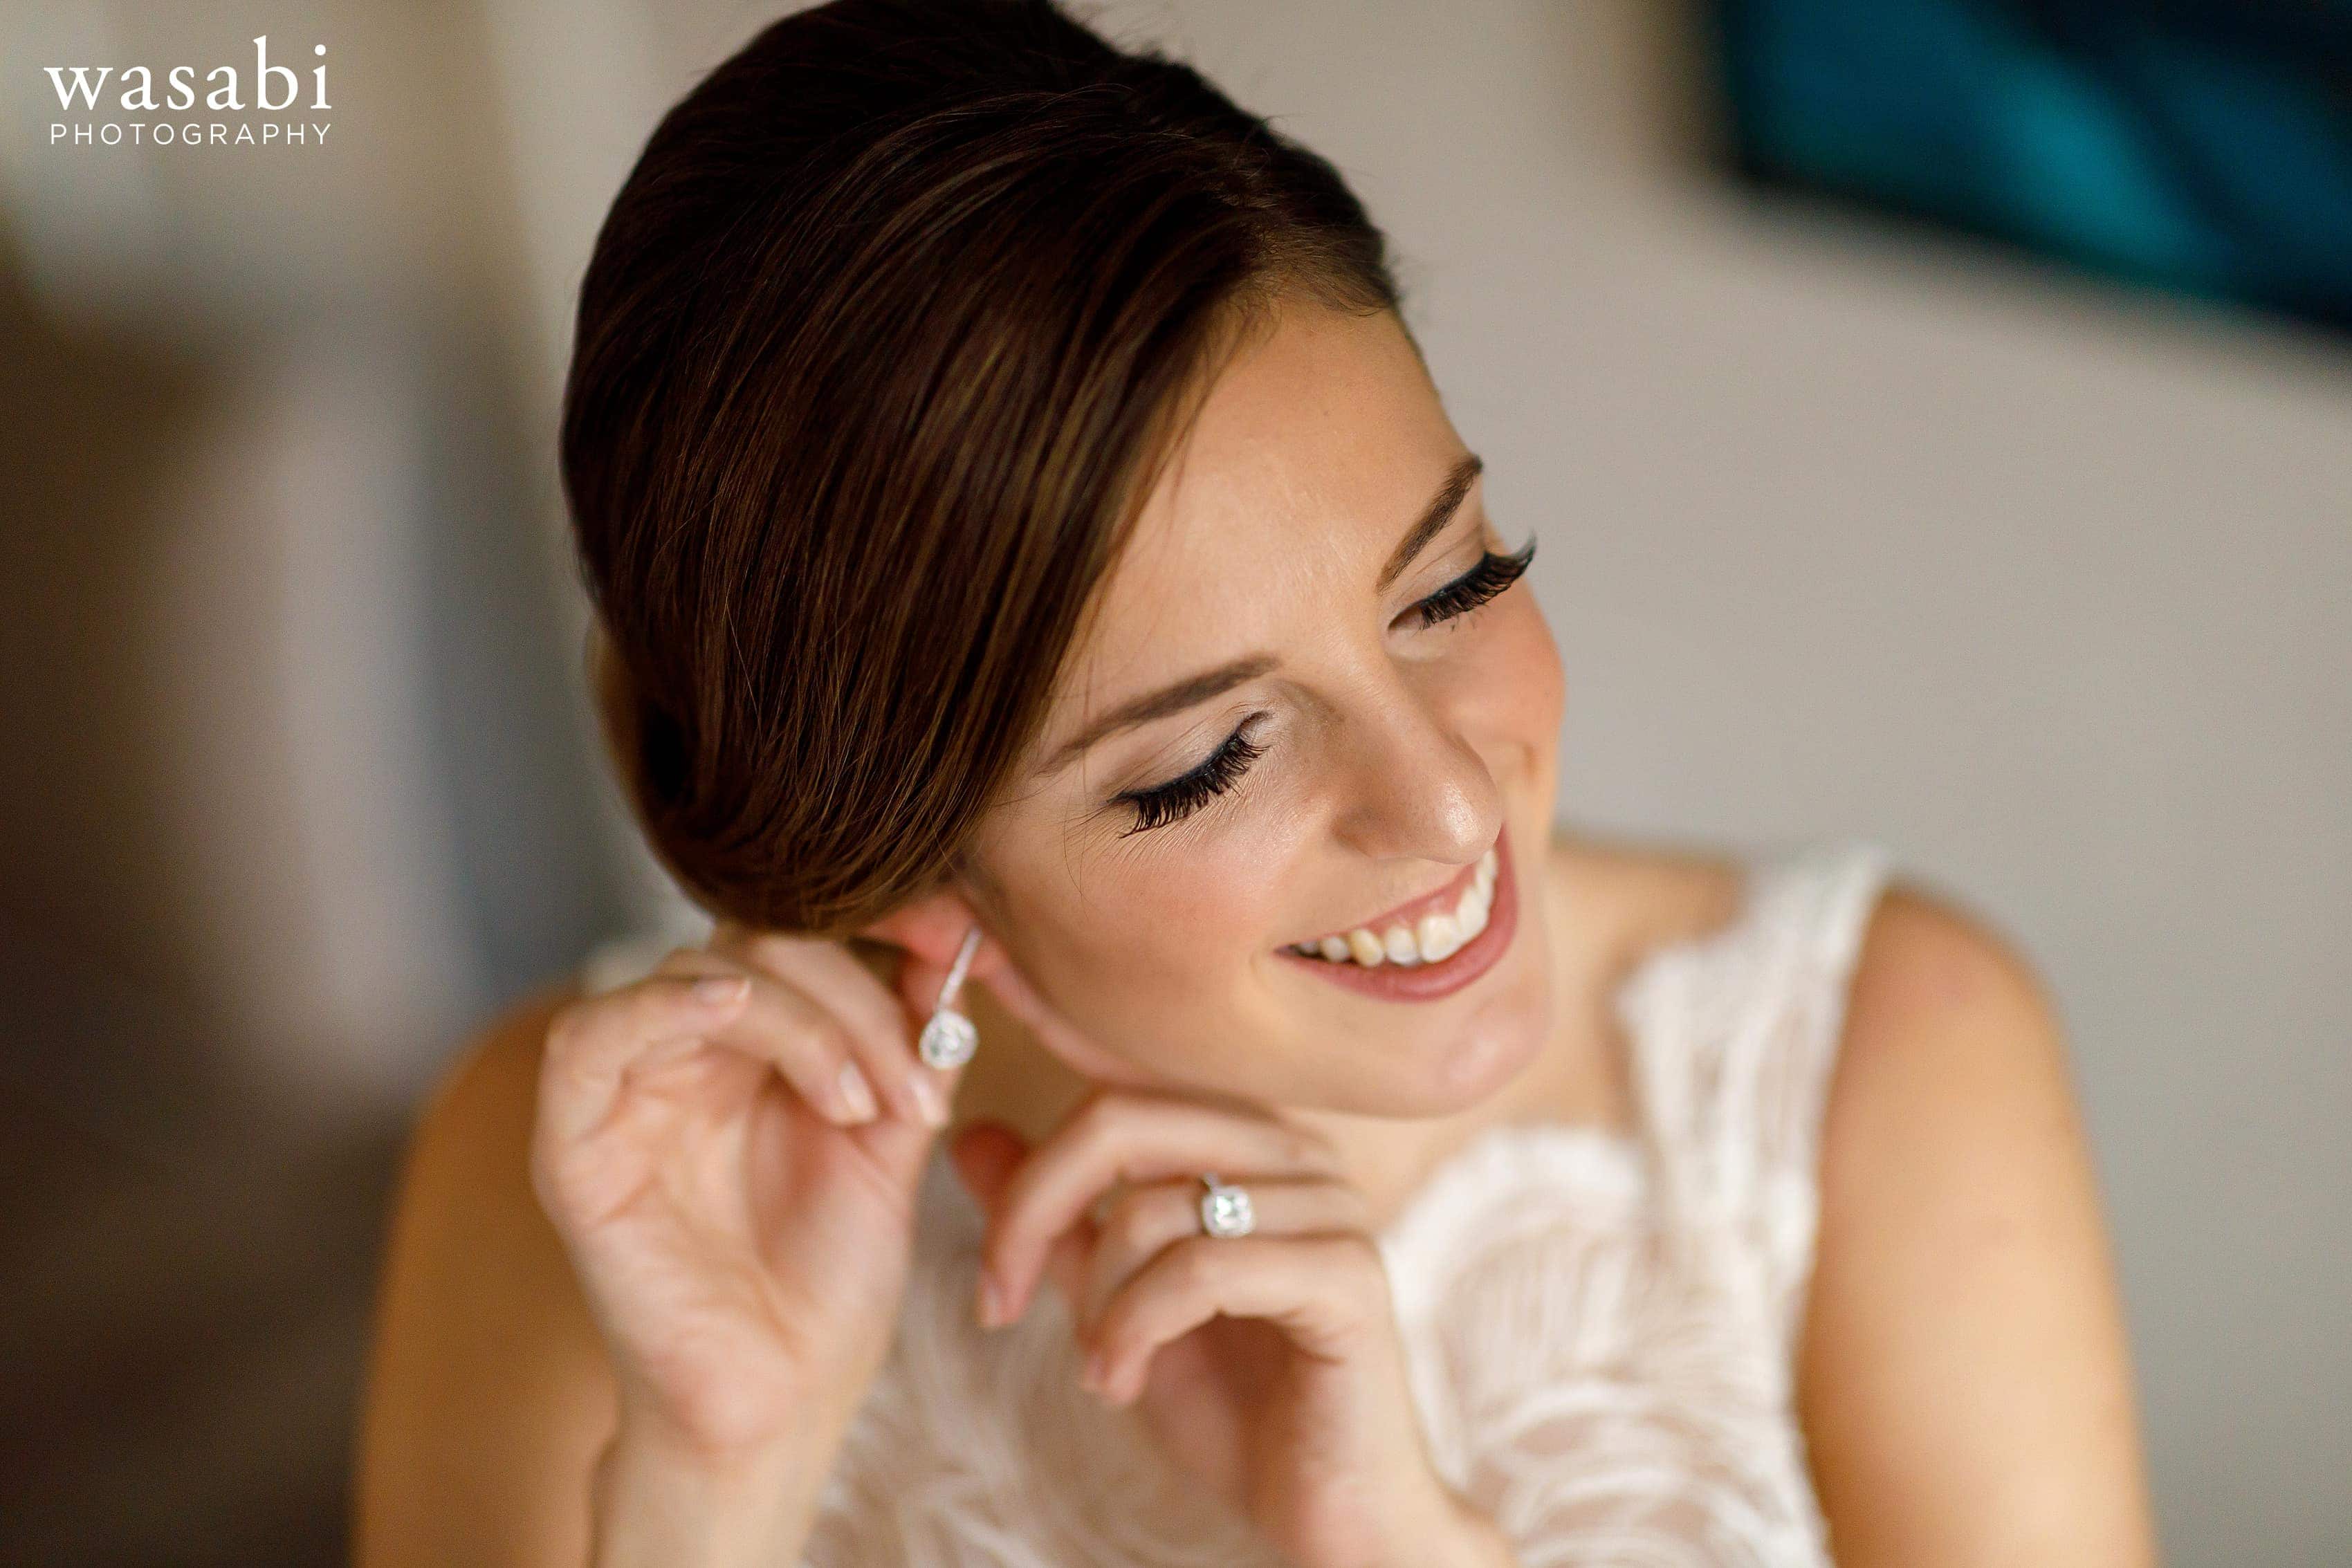 bride puts on earrings in the presidential suite while getting ready for wedding at InterContinental Chicago Magnificent Mile Hotel